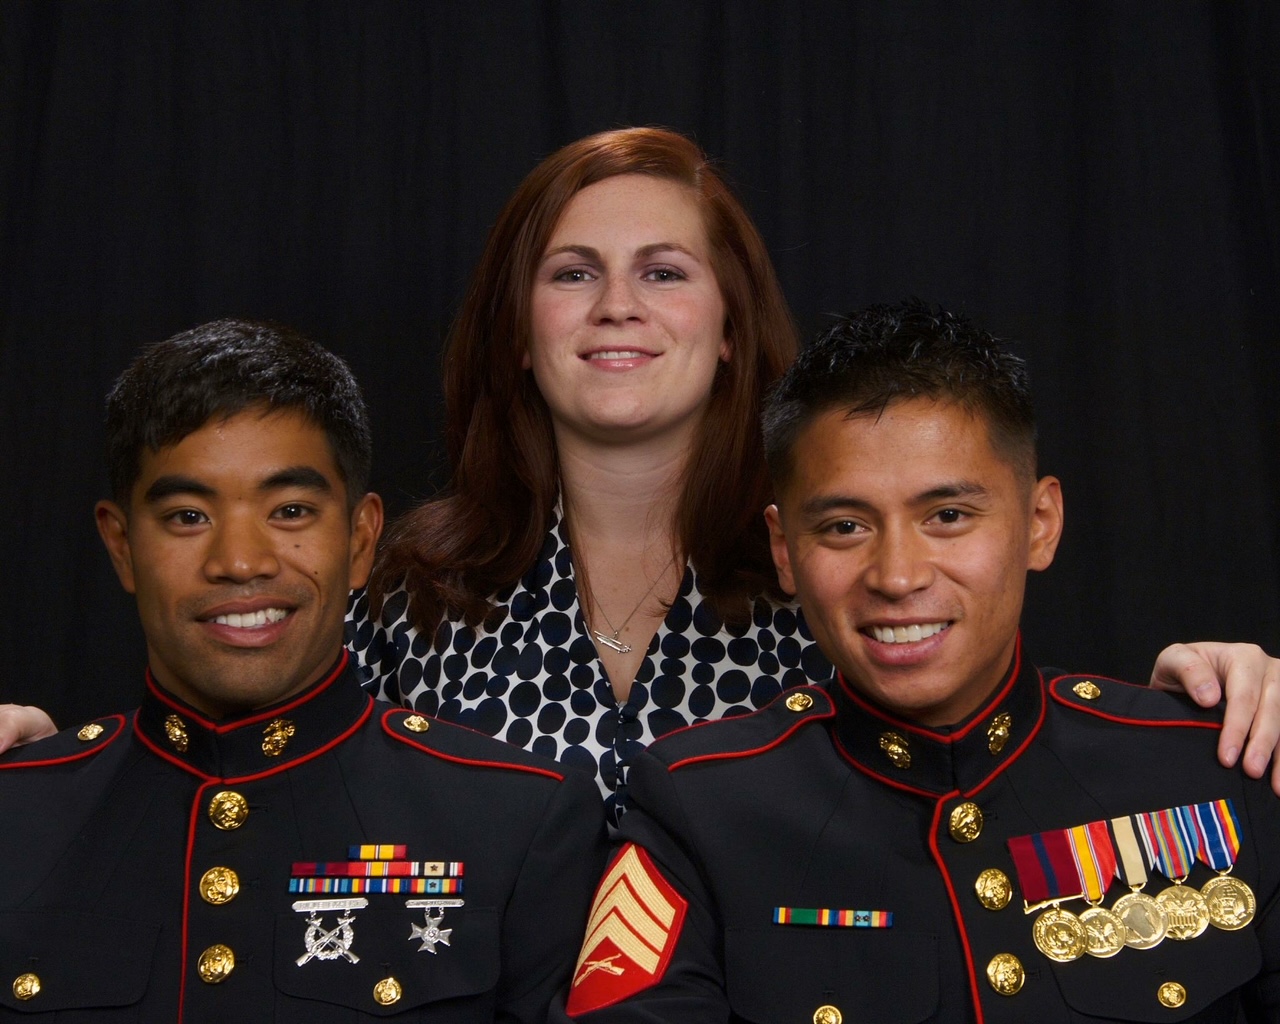 Libby Jamison standing behind two Marines in dress blue uniforms.